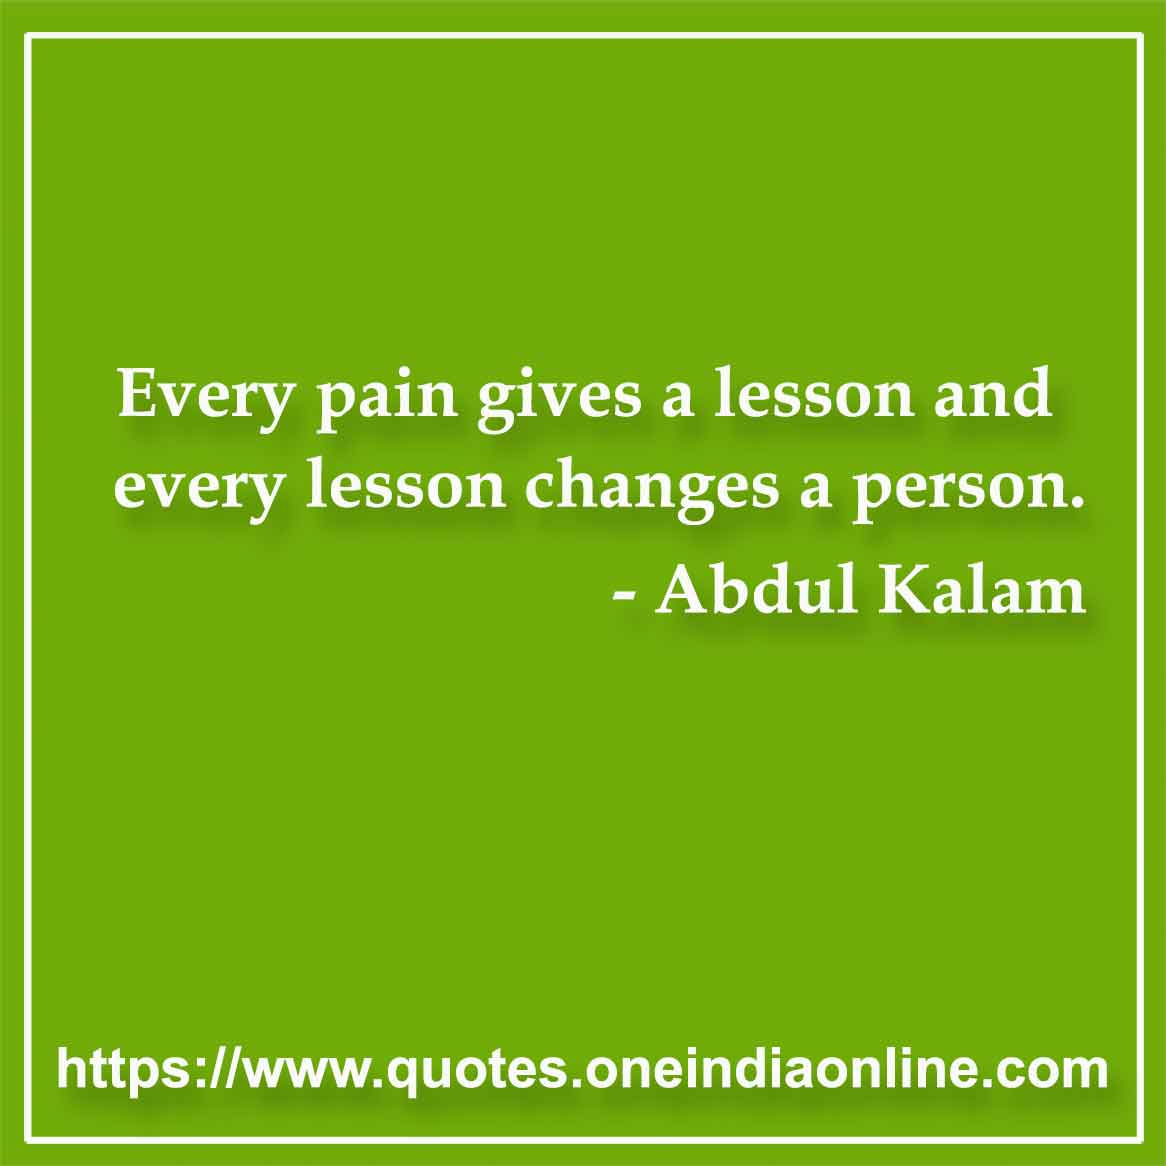 Every pain gives a lesson and every lesson changes a person.
